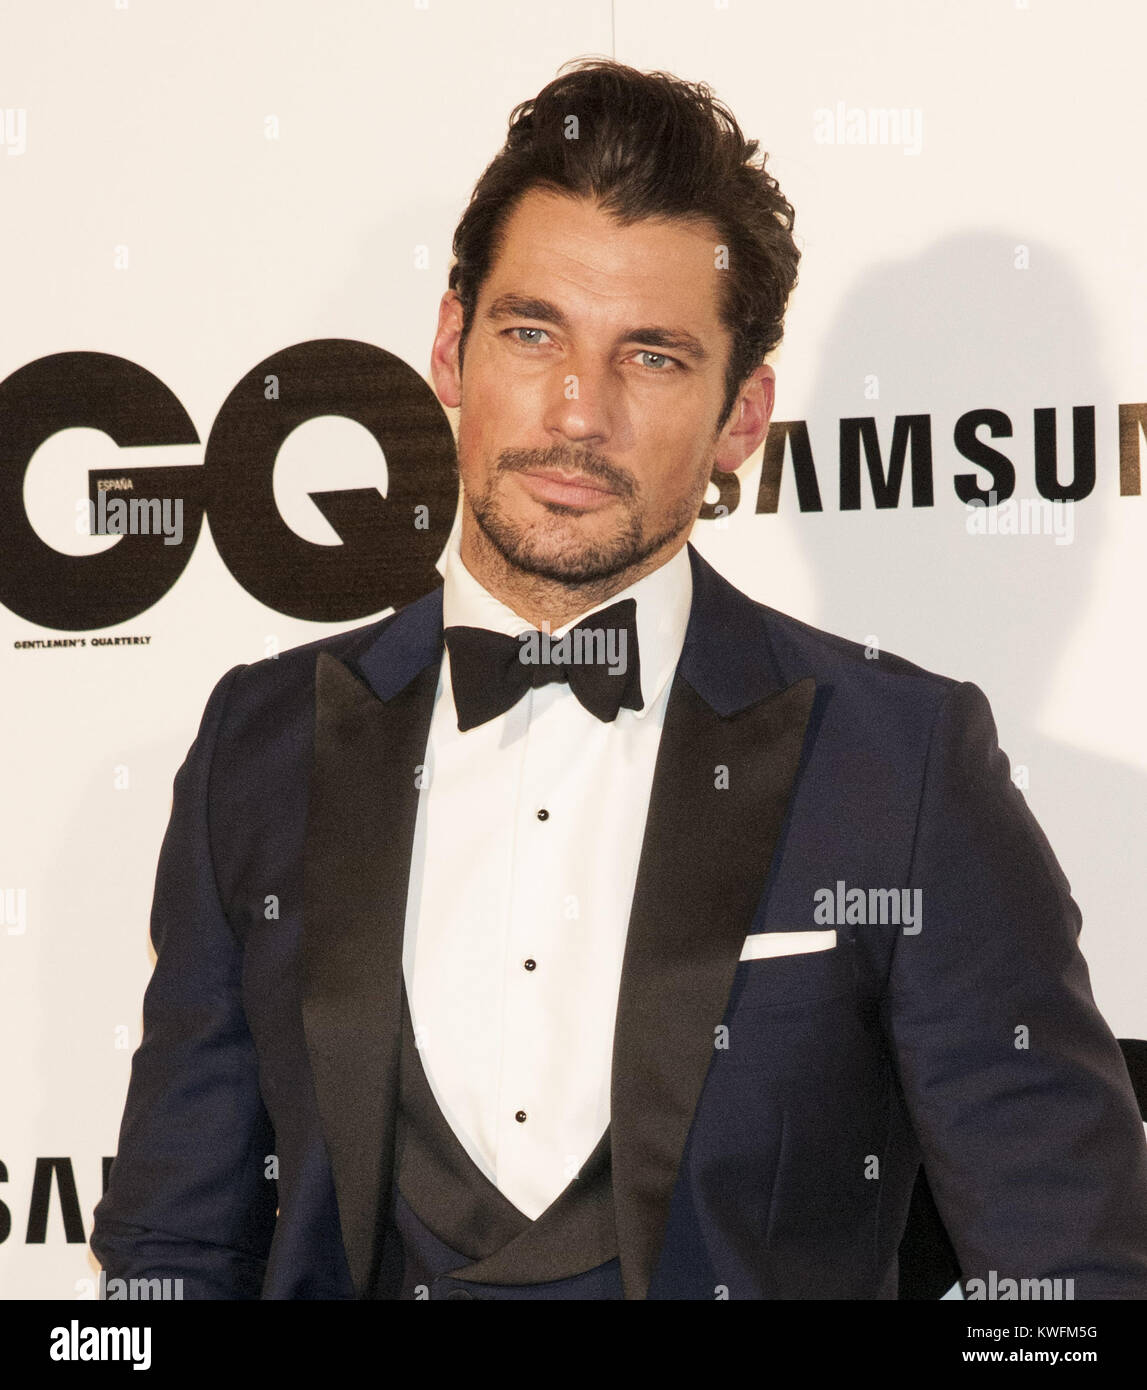 MADRID, SPAIN - NOVEMBER 03: David Gandy  attends the 'GQ Men Of The Year awards 2014' at Palace hotel on November 3, 2014 in Madrid, Spain.  People:  David Gandy Stock Photo